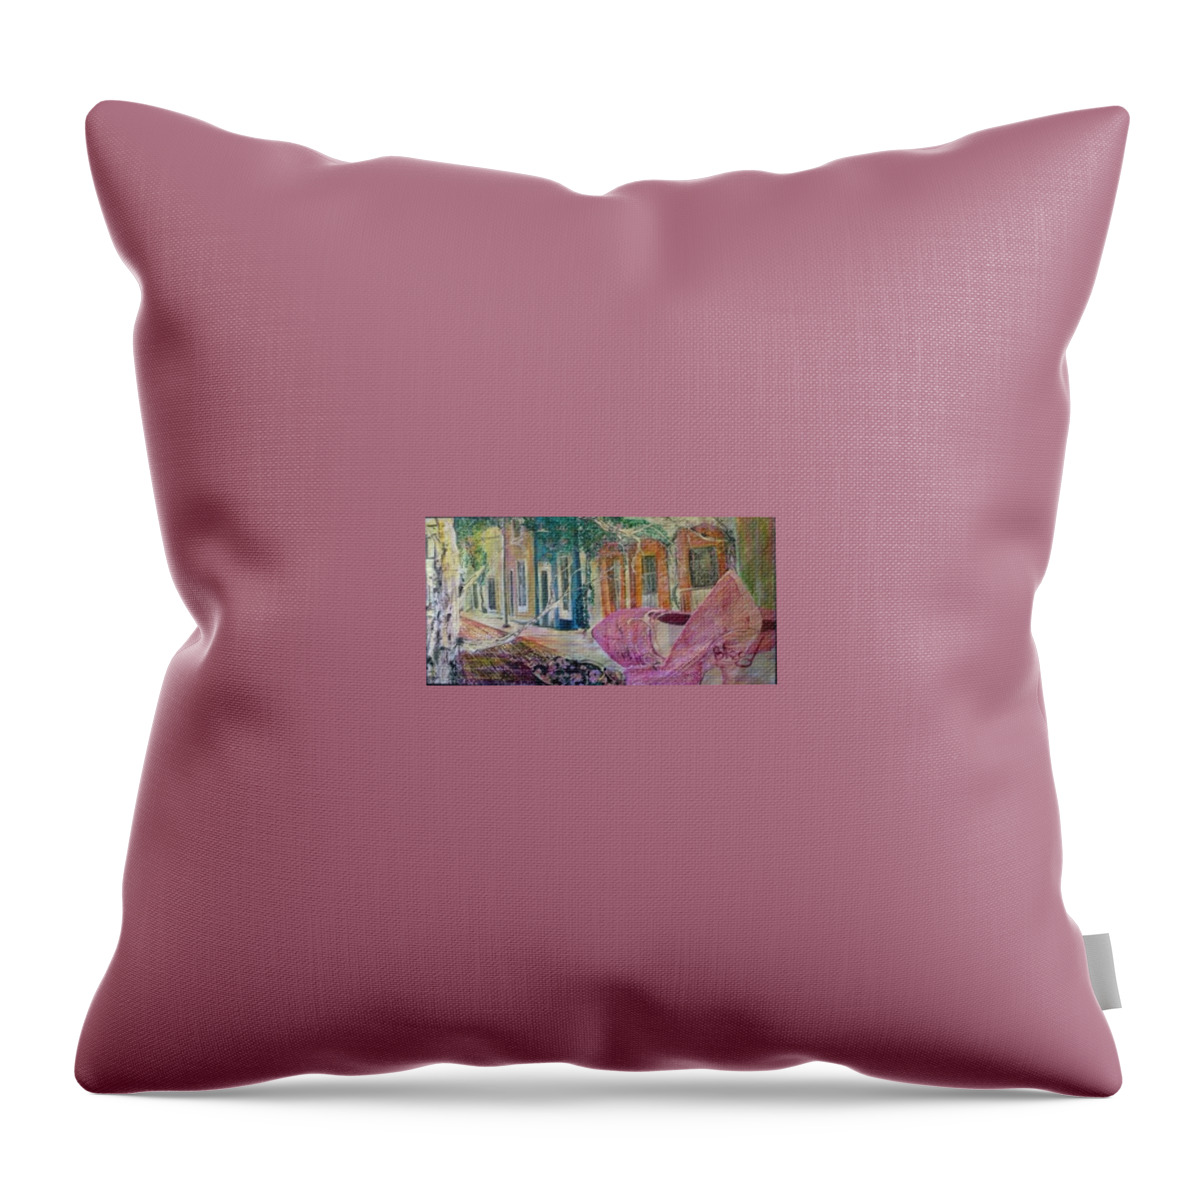 Shoes Throw Pillow featuring the painting Searching by Peggy Blood